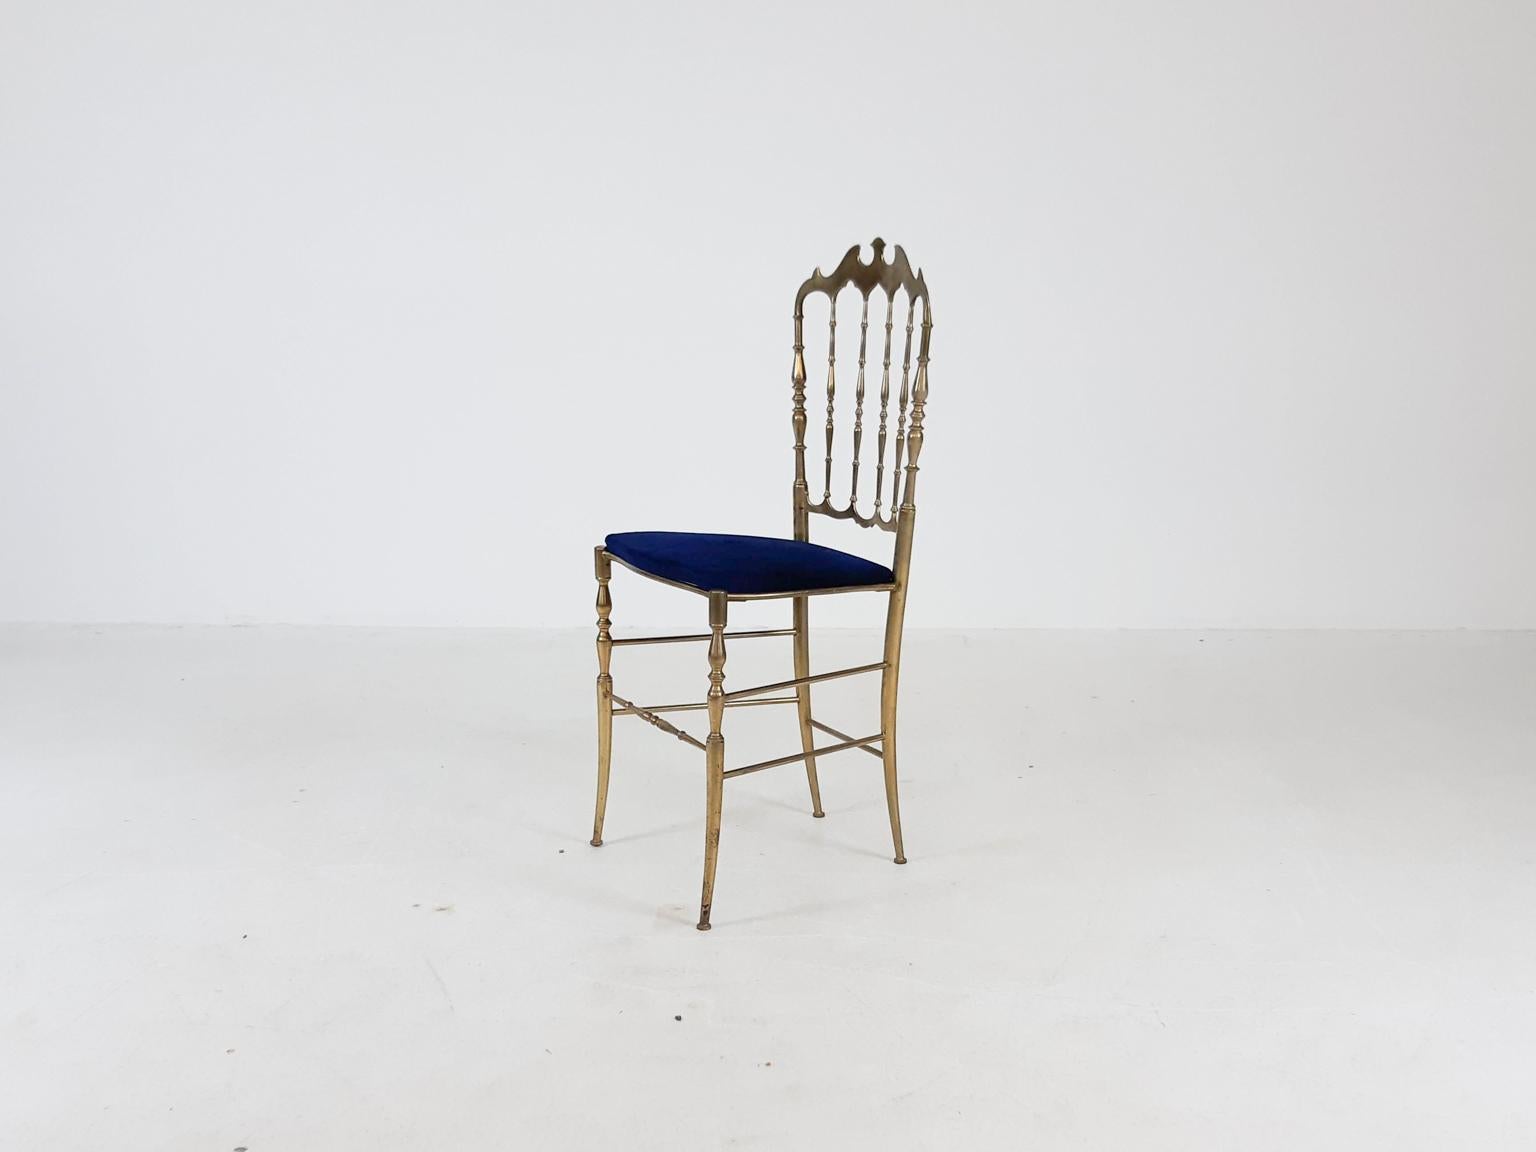 The famous brass dining chair by Giuseppe Gaetano Descalzi for Chiavari. A Classic Italian design from the 1950s.

You could use this chair at your dining table, but it would also be beautiful as a side chair in your hallway or bedroom.

It has